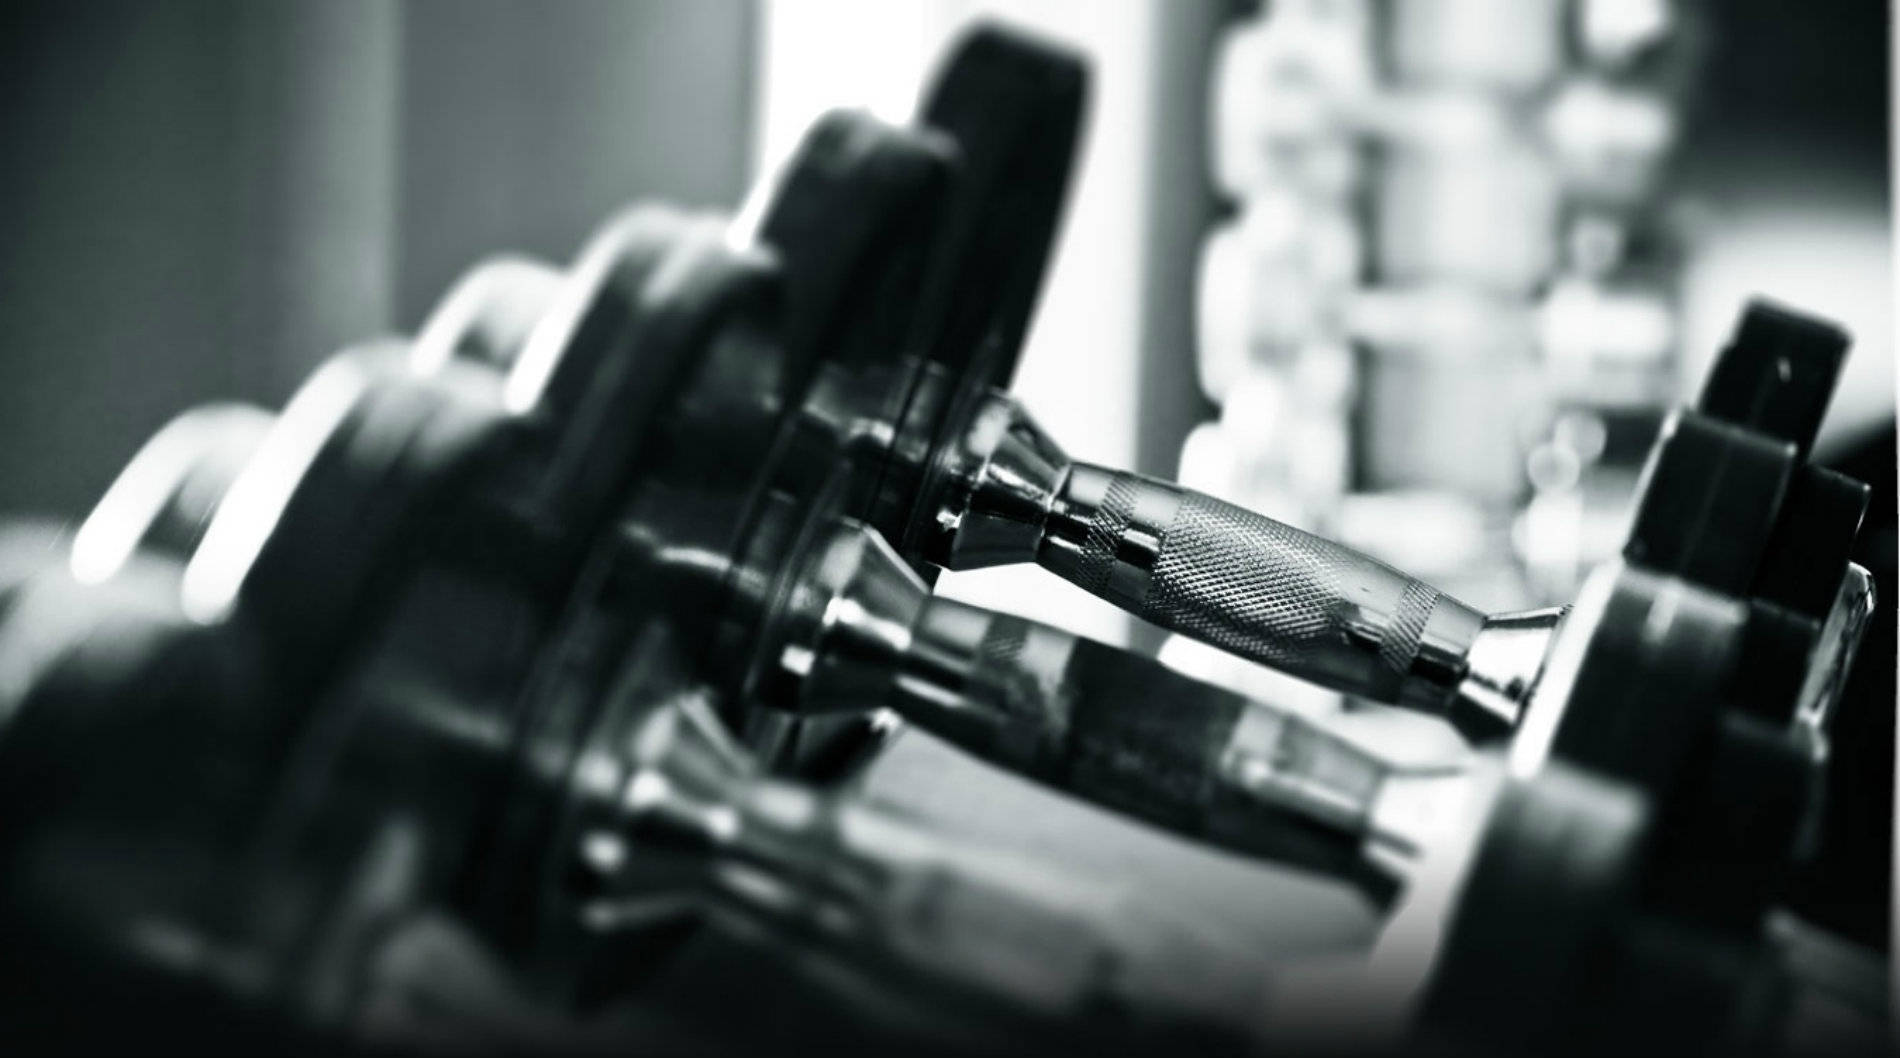 Grayscale Dumbbells Fitness Photography Background